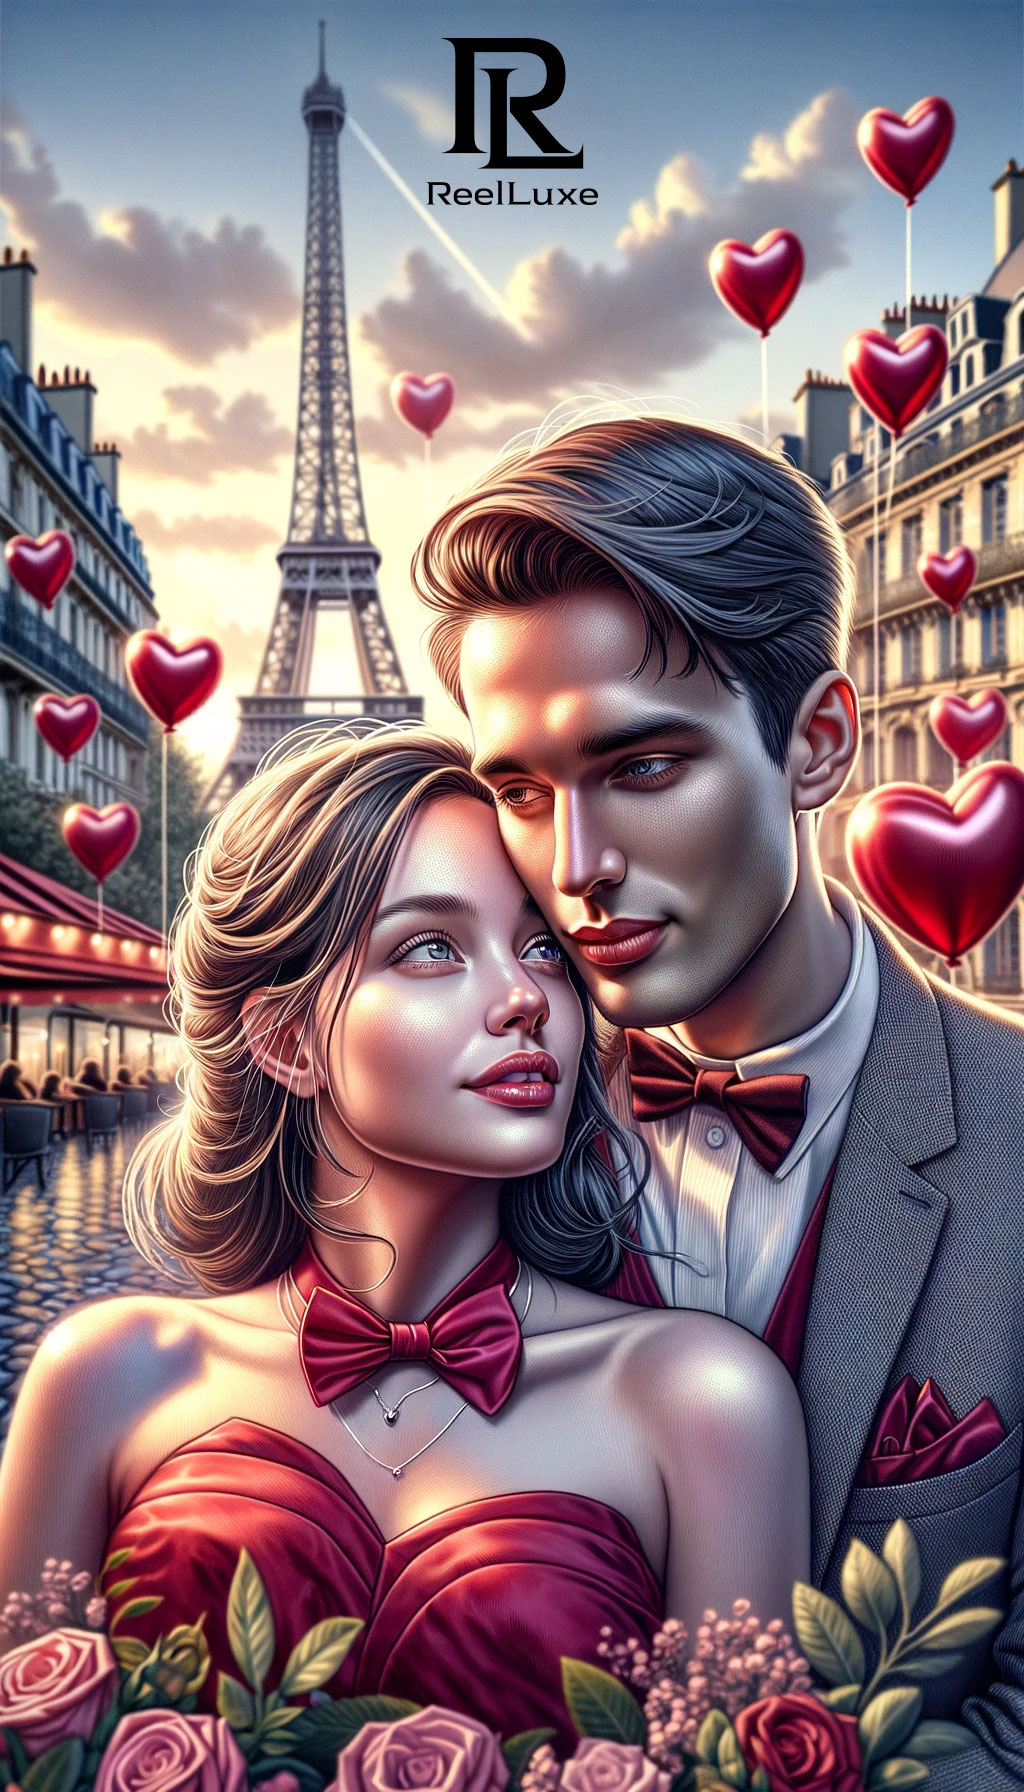 Romance in the Air – Valentine’s Day – Beauty and Fashion – Paris, France – 1